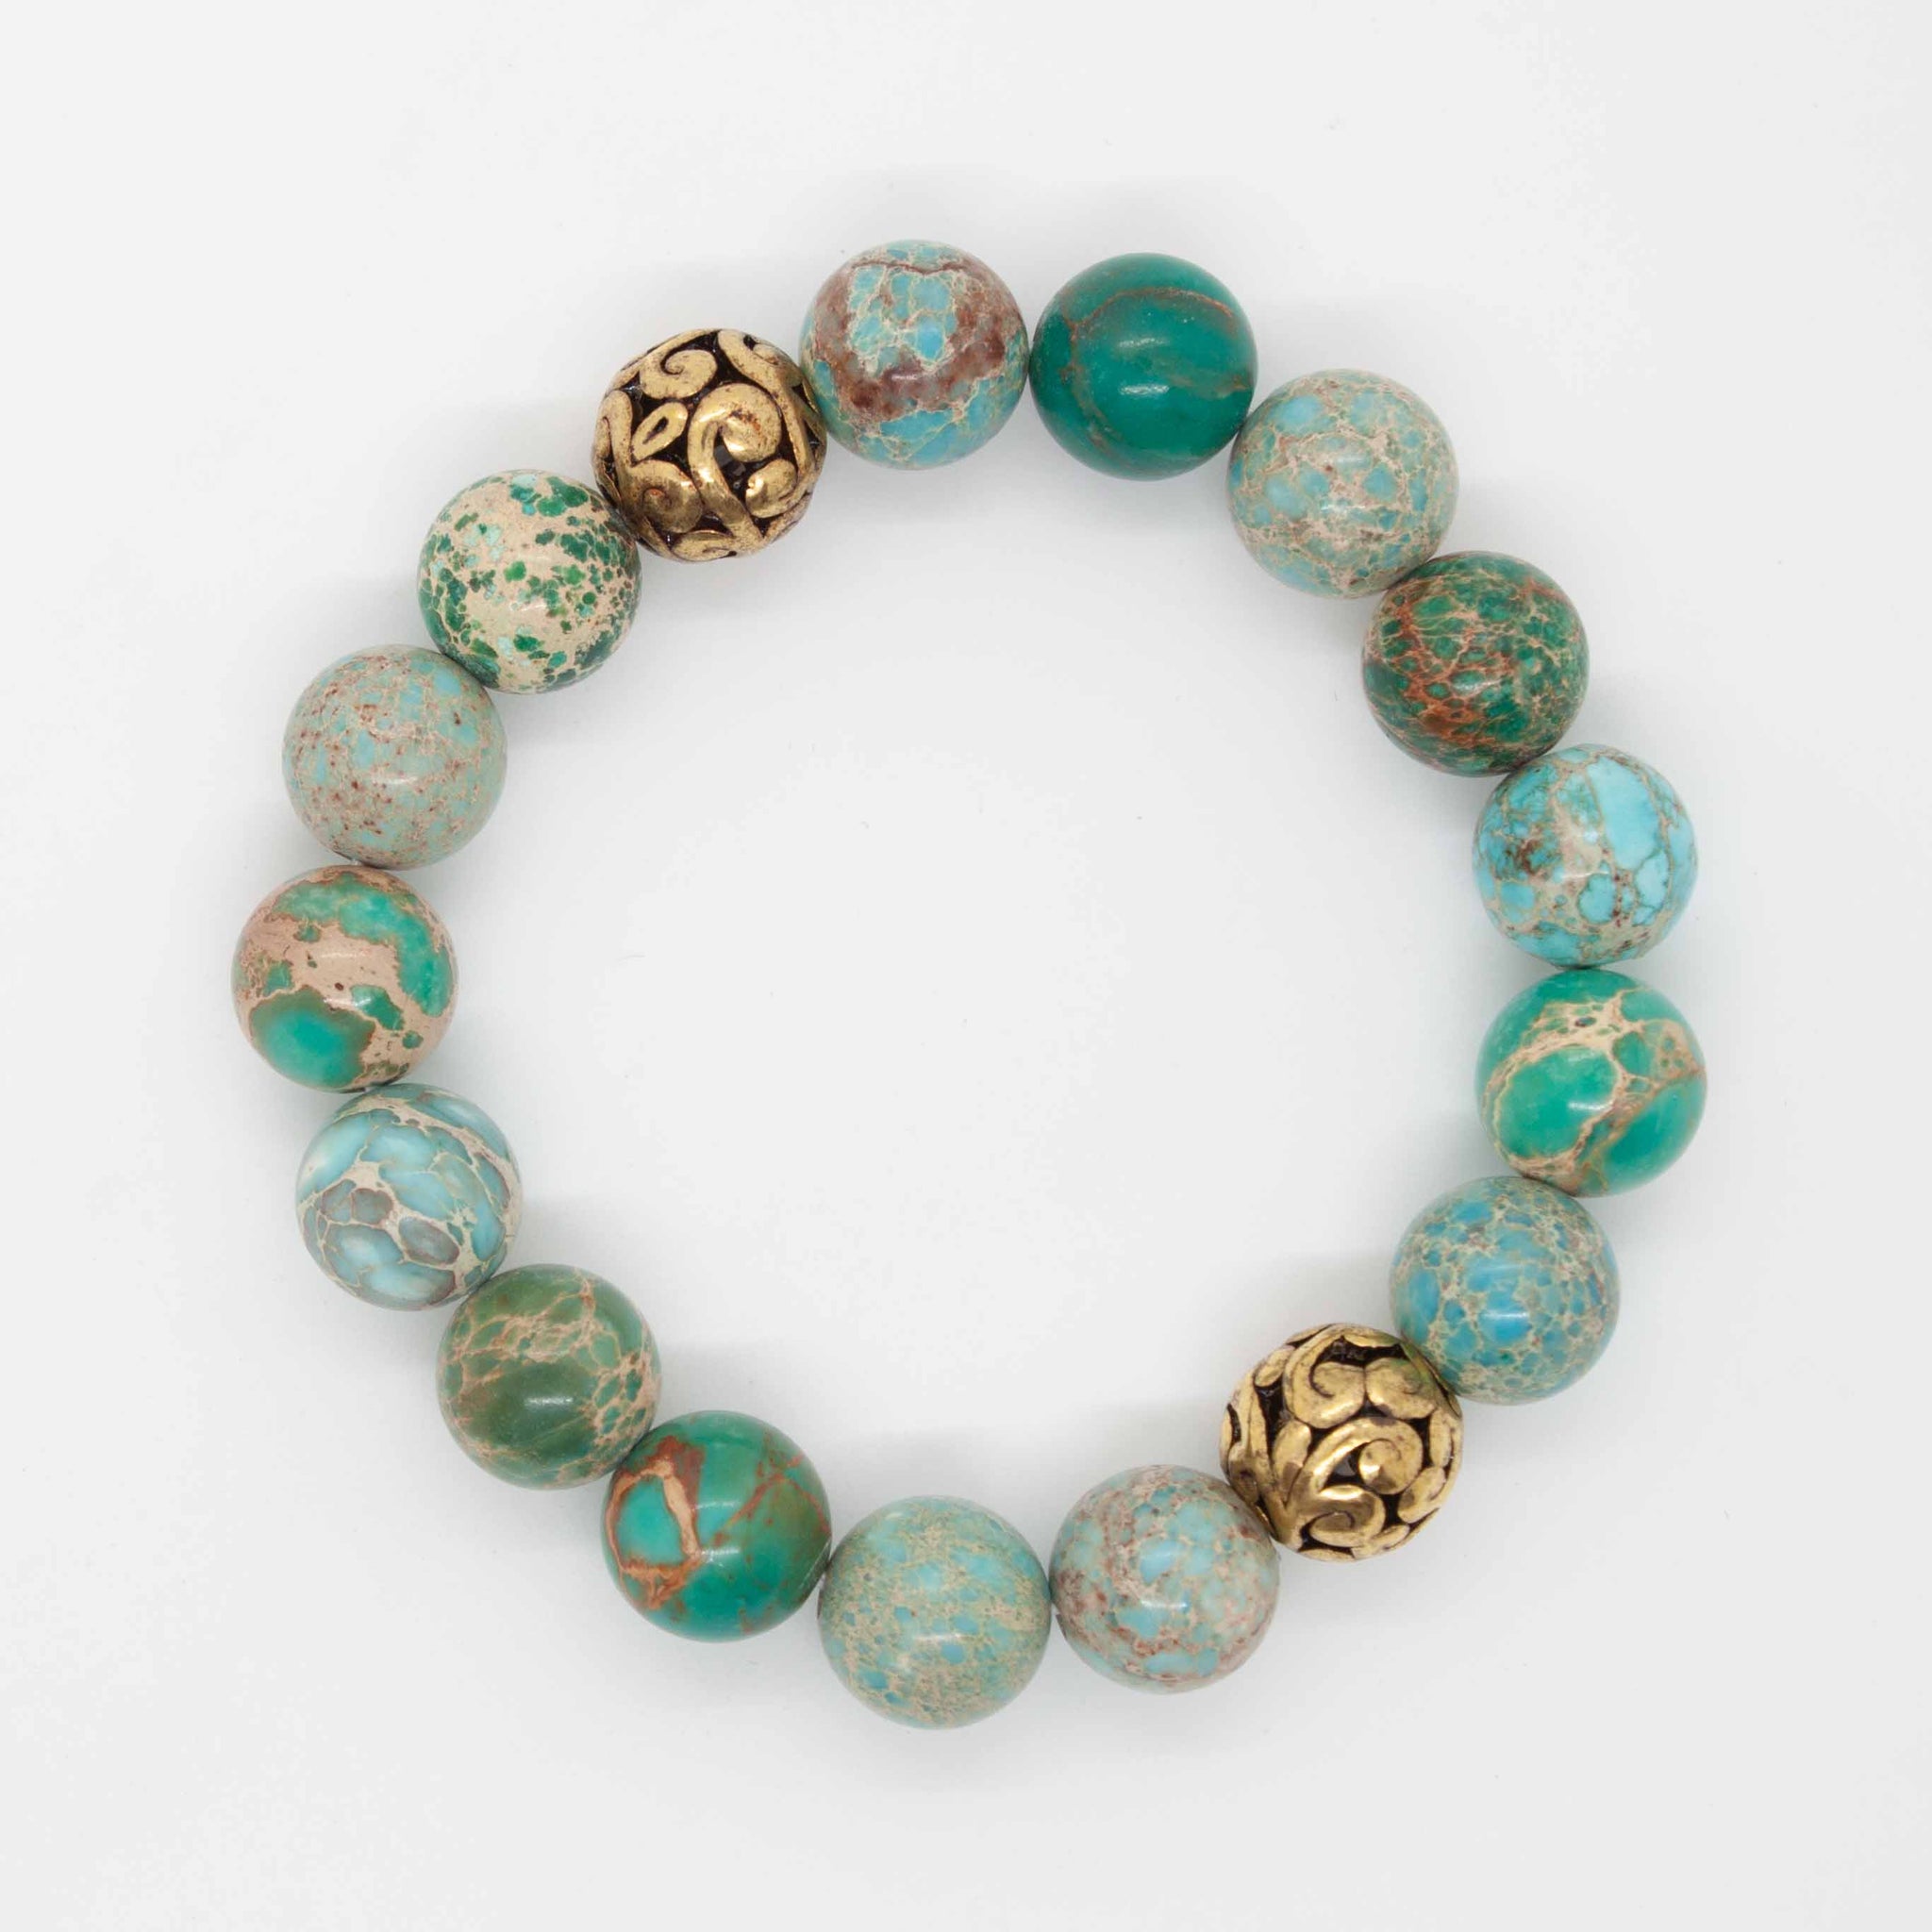 Wear this bracelet and be soothed by the green, aqua and turquoise colours of the ocean. 7 inch bracelet made with aquamarine and sky blue jasper beads, along with brass accents, double strung with silk elastic. Handmade in Toronto by kp jewelry co.